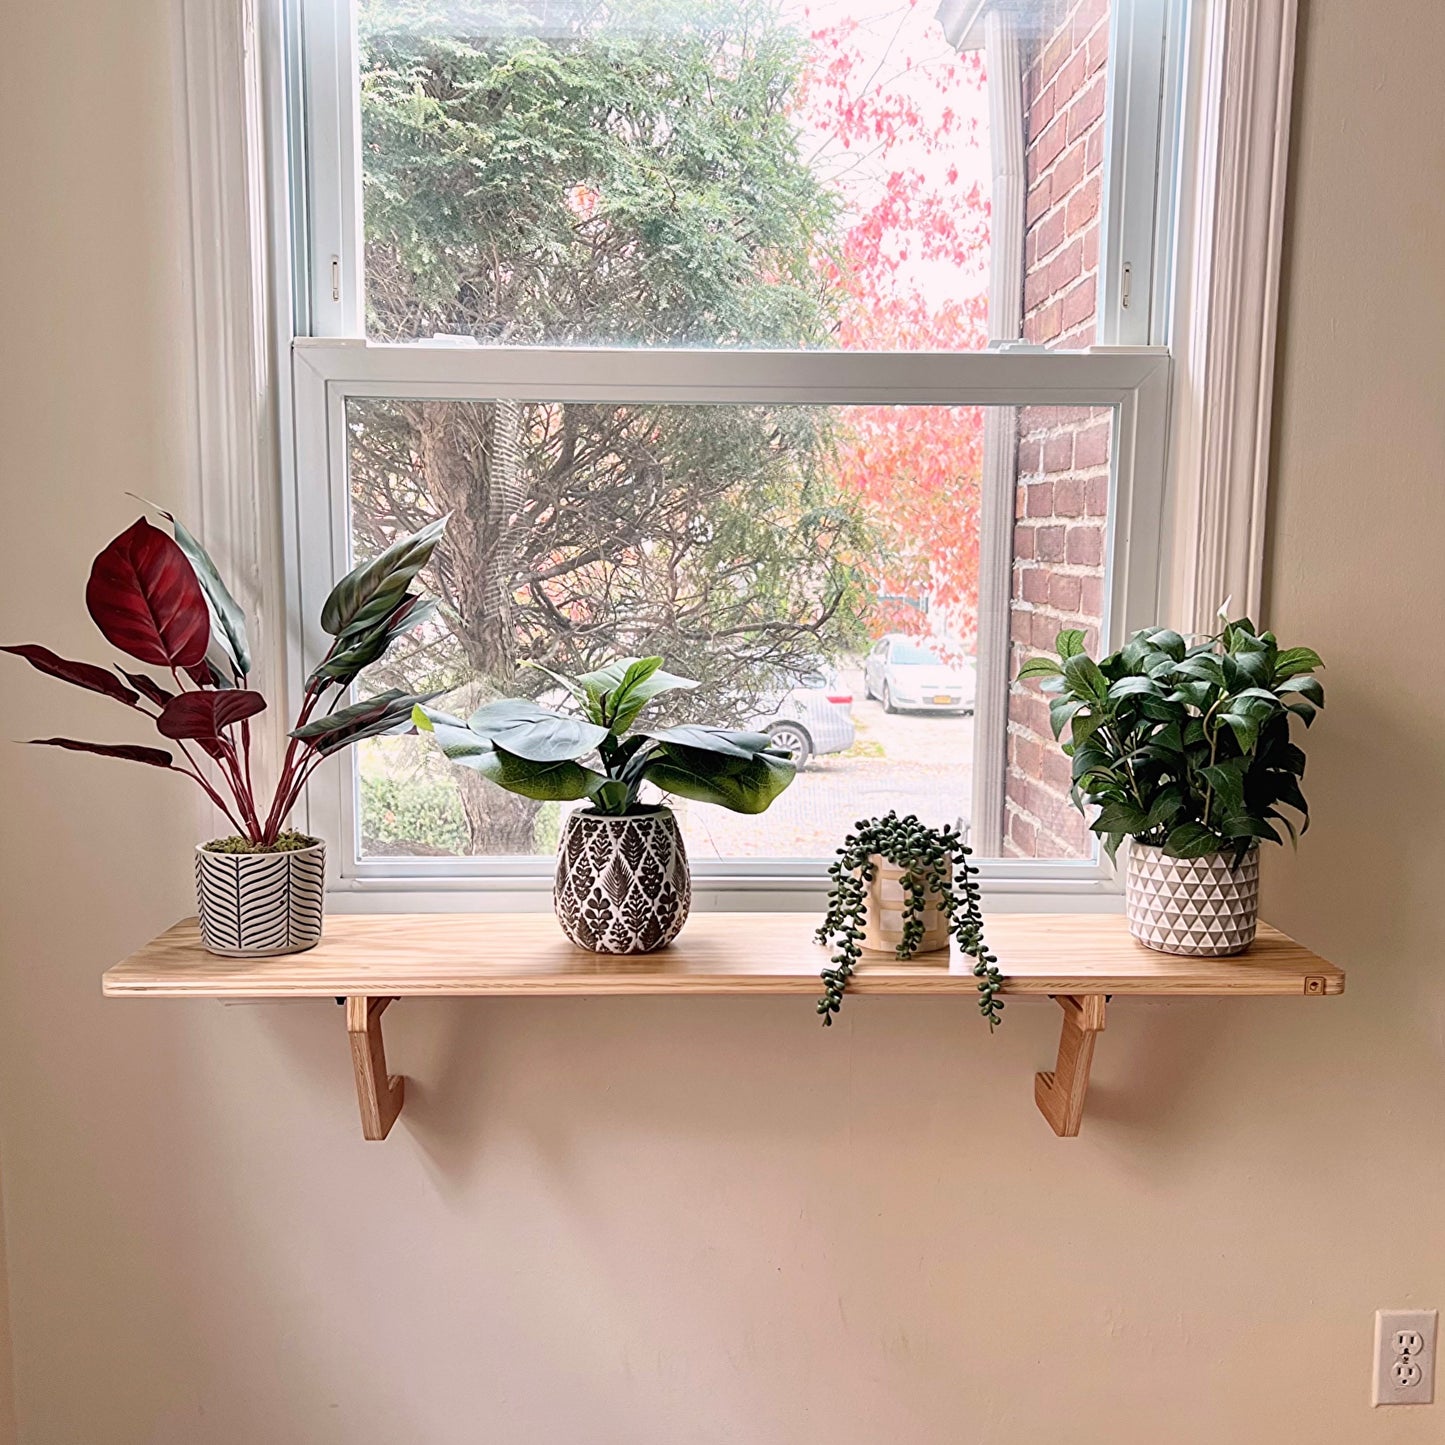 Shelves of various sizes_Oak Window Shelf_Sturdy-Safe support legs_Installed-removed 1 minute_No tools nails_Plant Shelf_Flower Herb Shelf